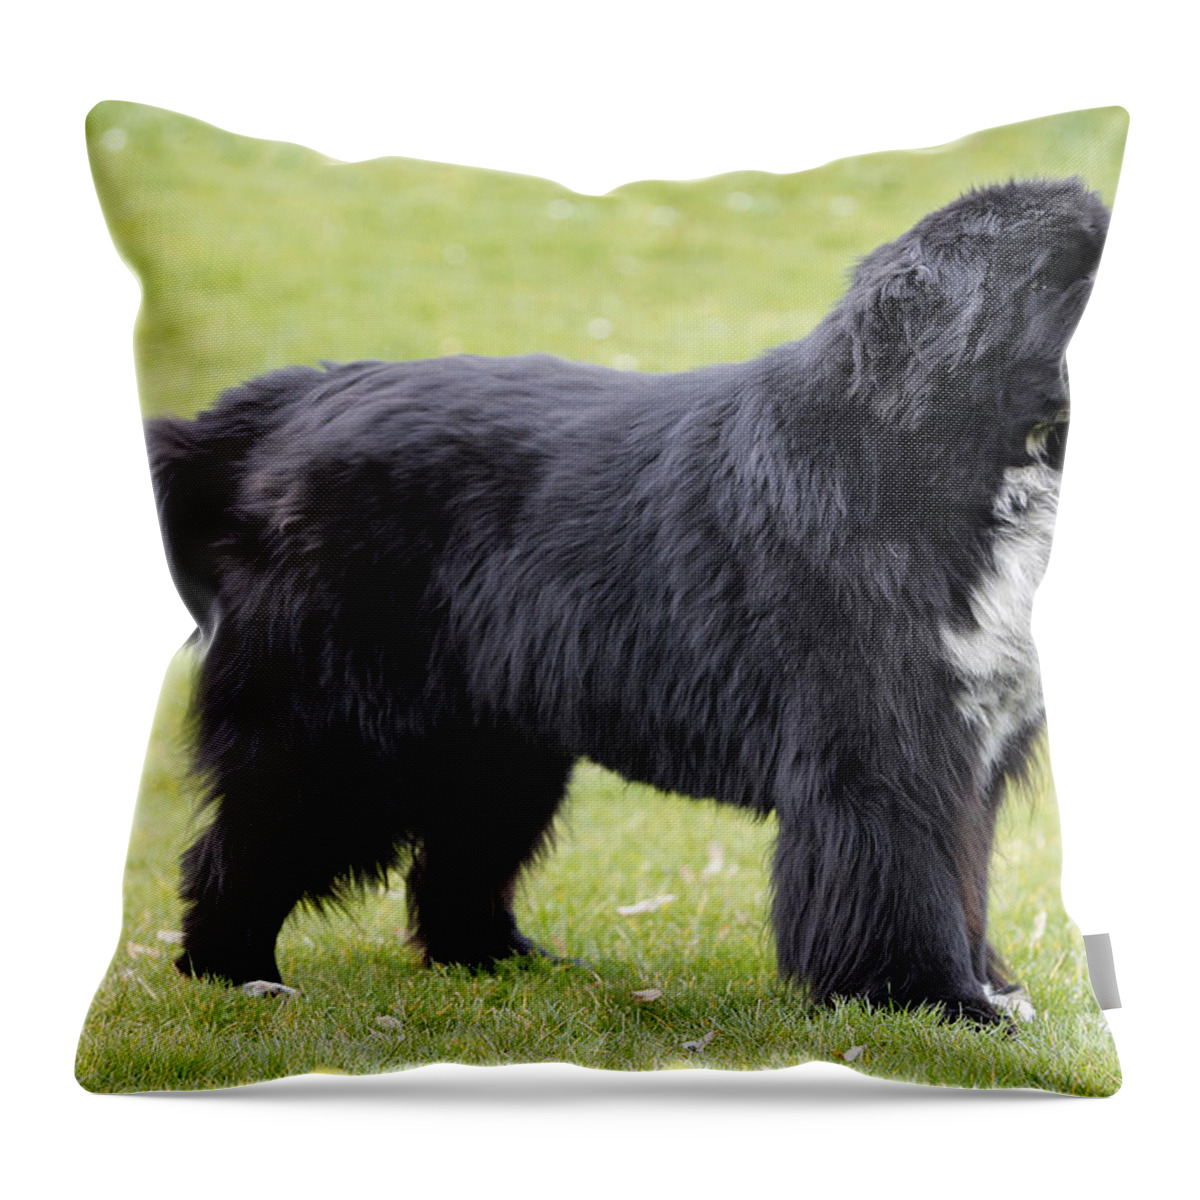 Newfoundland Throw Pillow featuring the photograph Newfoundland Dog #5 by Jean-Michel Labat